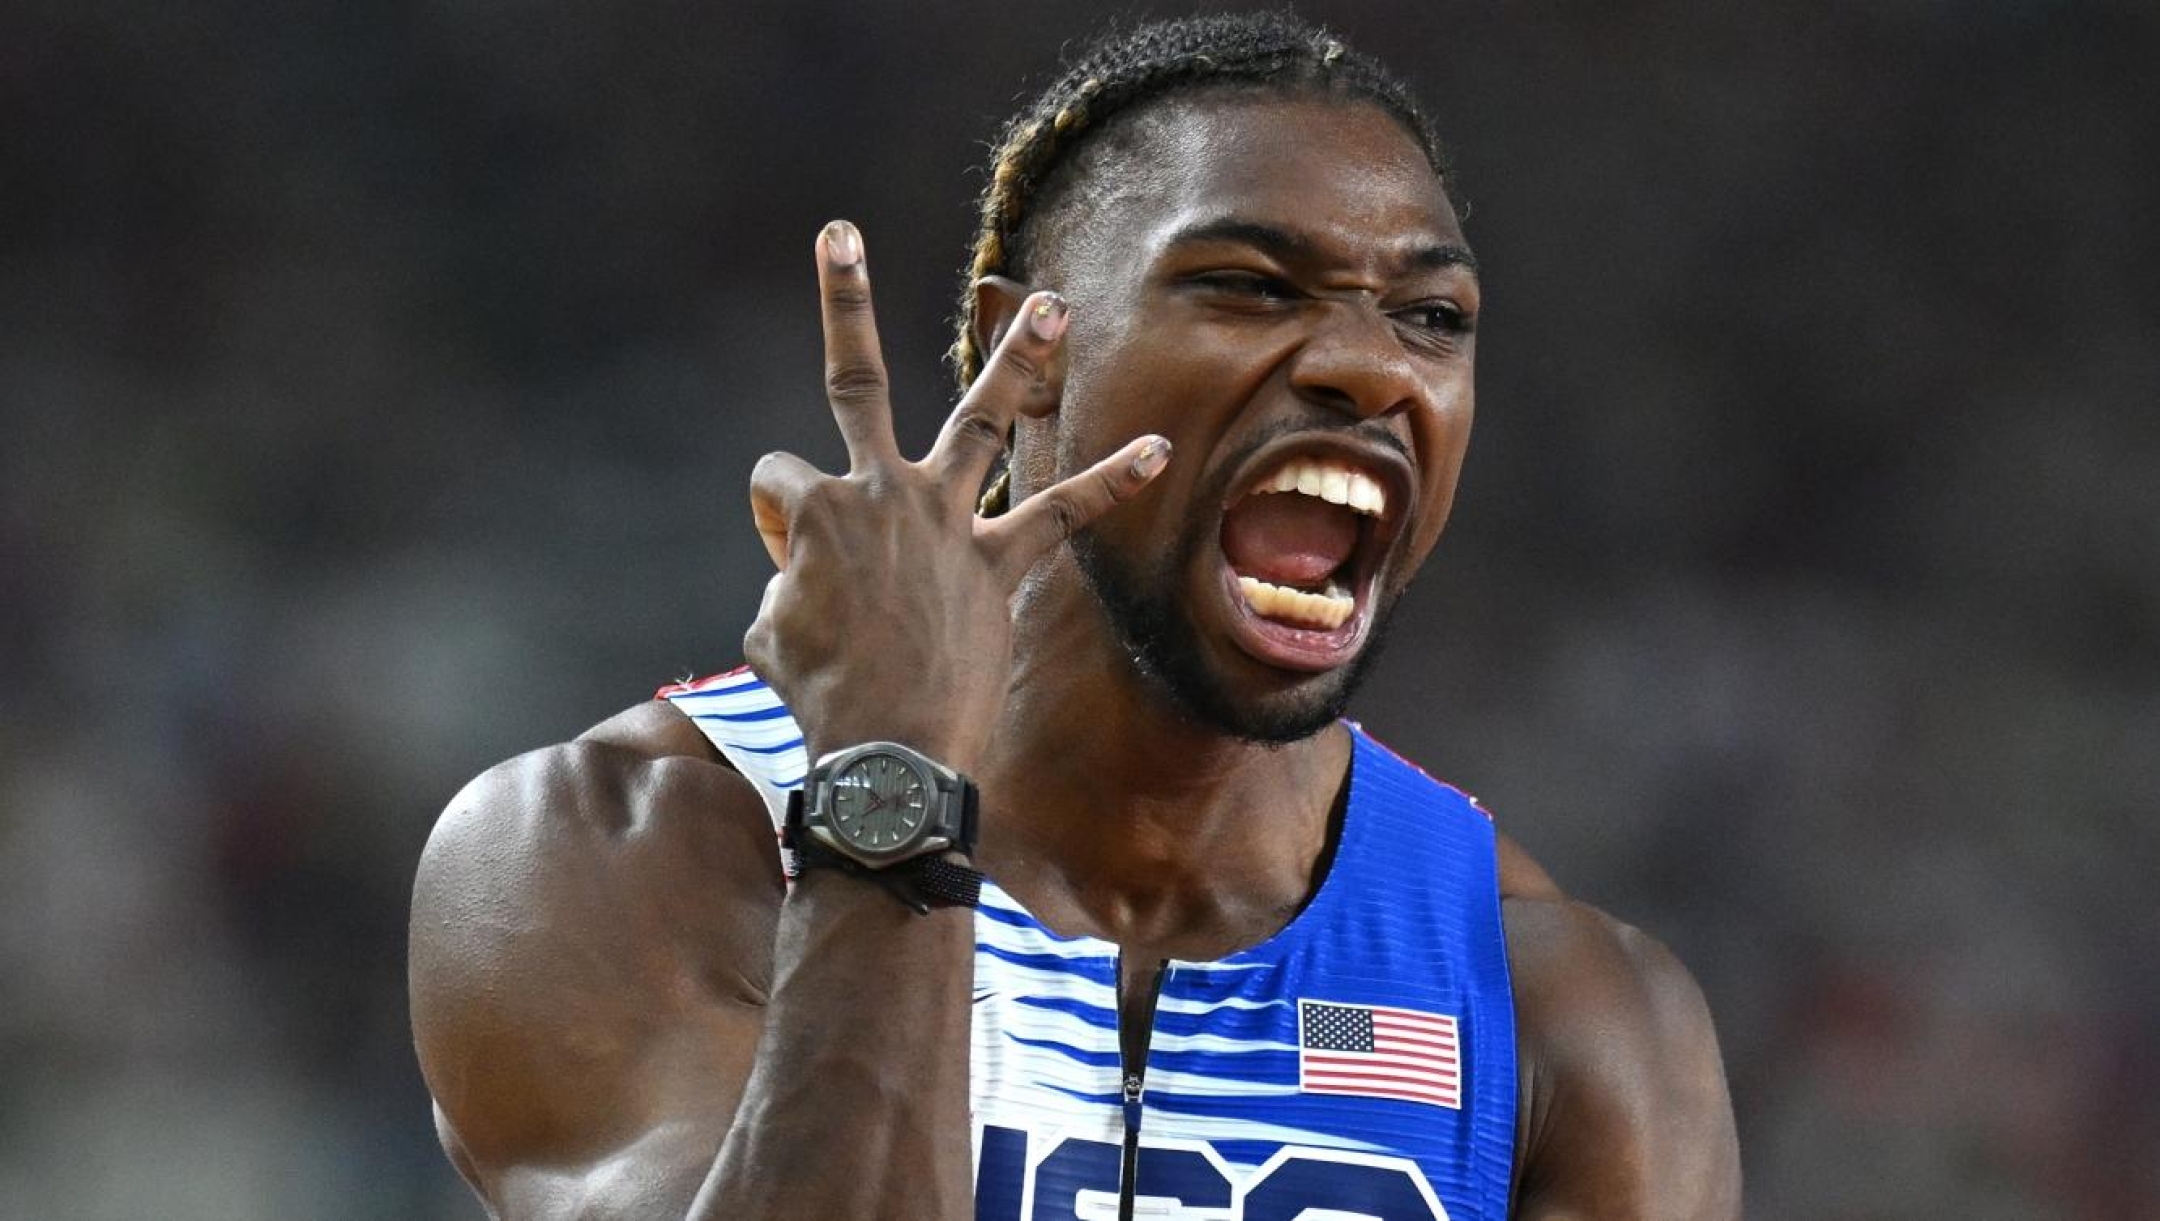 2023 Year In Review - Sport BUDAPEST, HUNGARY - AUGUST 26: Noah Lyles of Team United States reacts after winning the Men's 4x100m Relay Final during day eight of the World Athletics Championships Budapest 2023 at National Athletics Centre on August 26, 2023 in Budapest, Hungary. (Photo by Shaun Botterill/Getty Images)